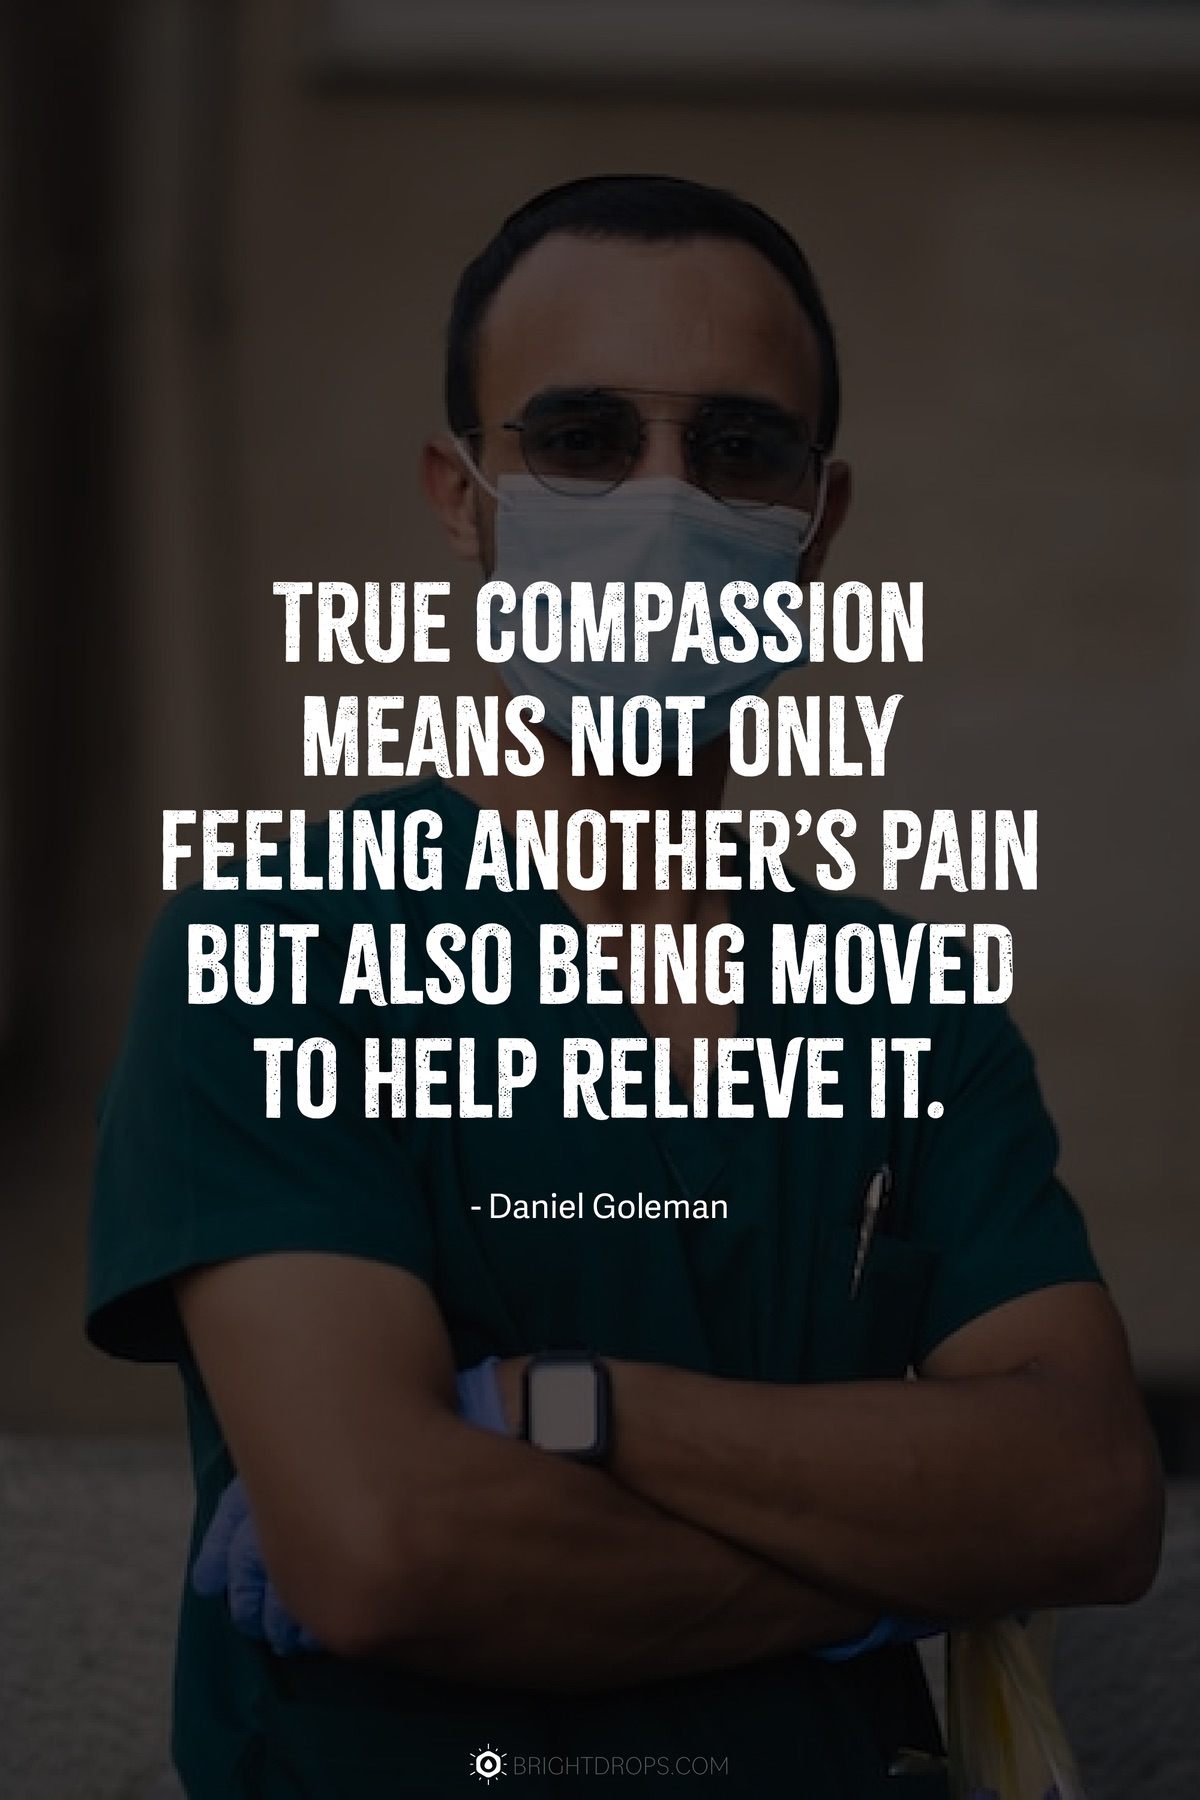 True compassion means not only feeling another’s pain but also being moved to help relieve it.